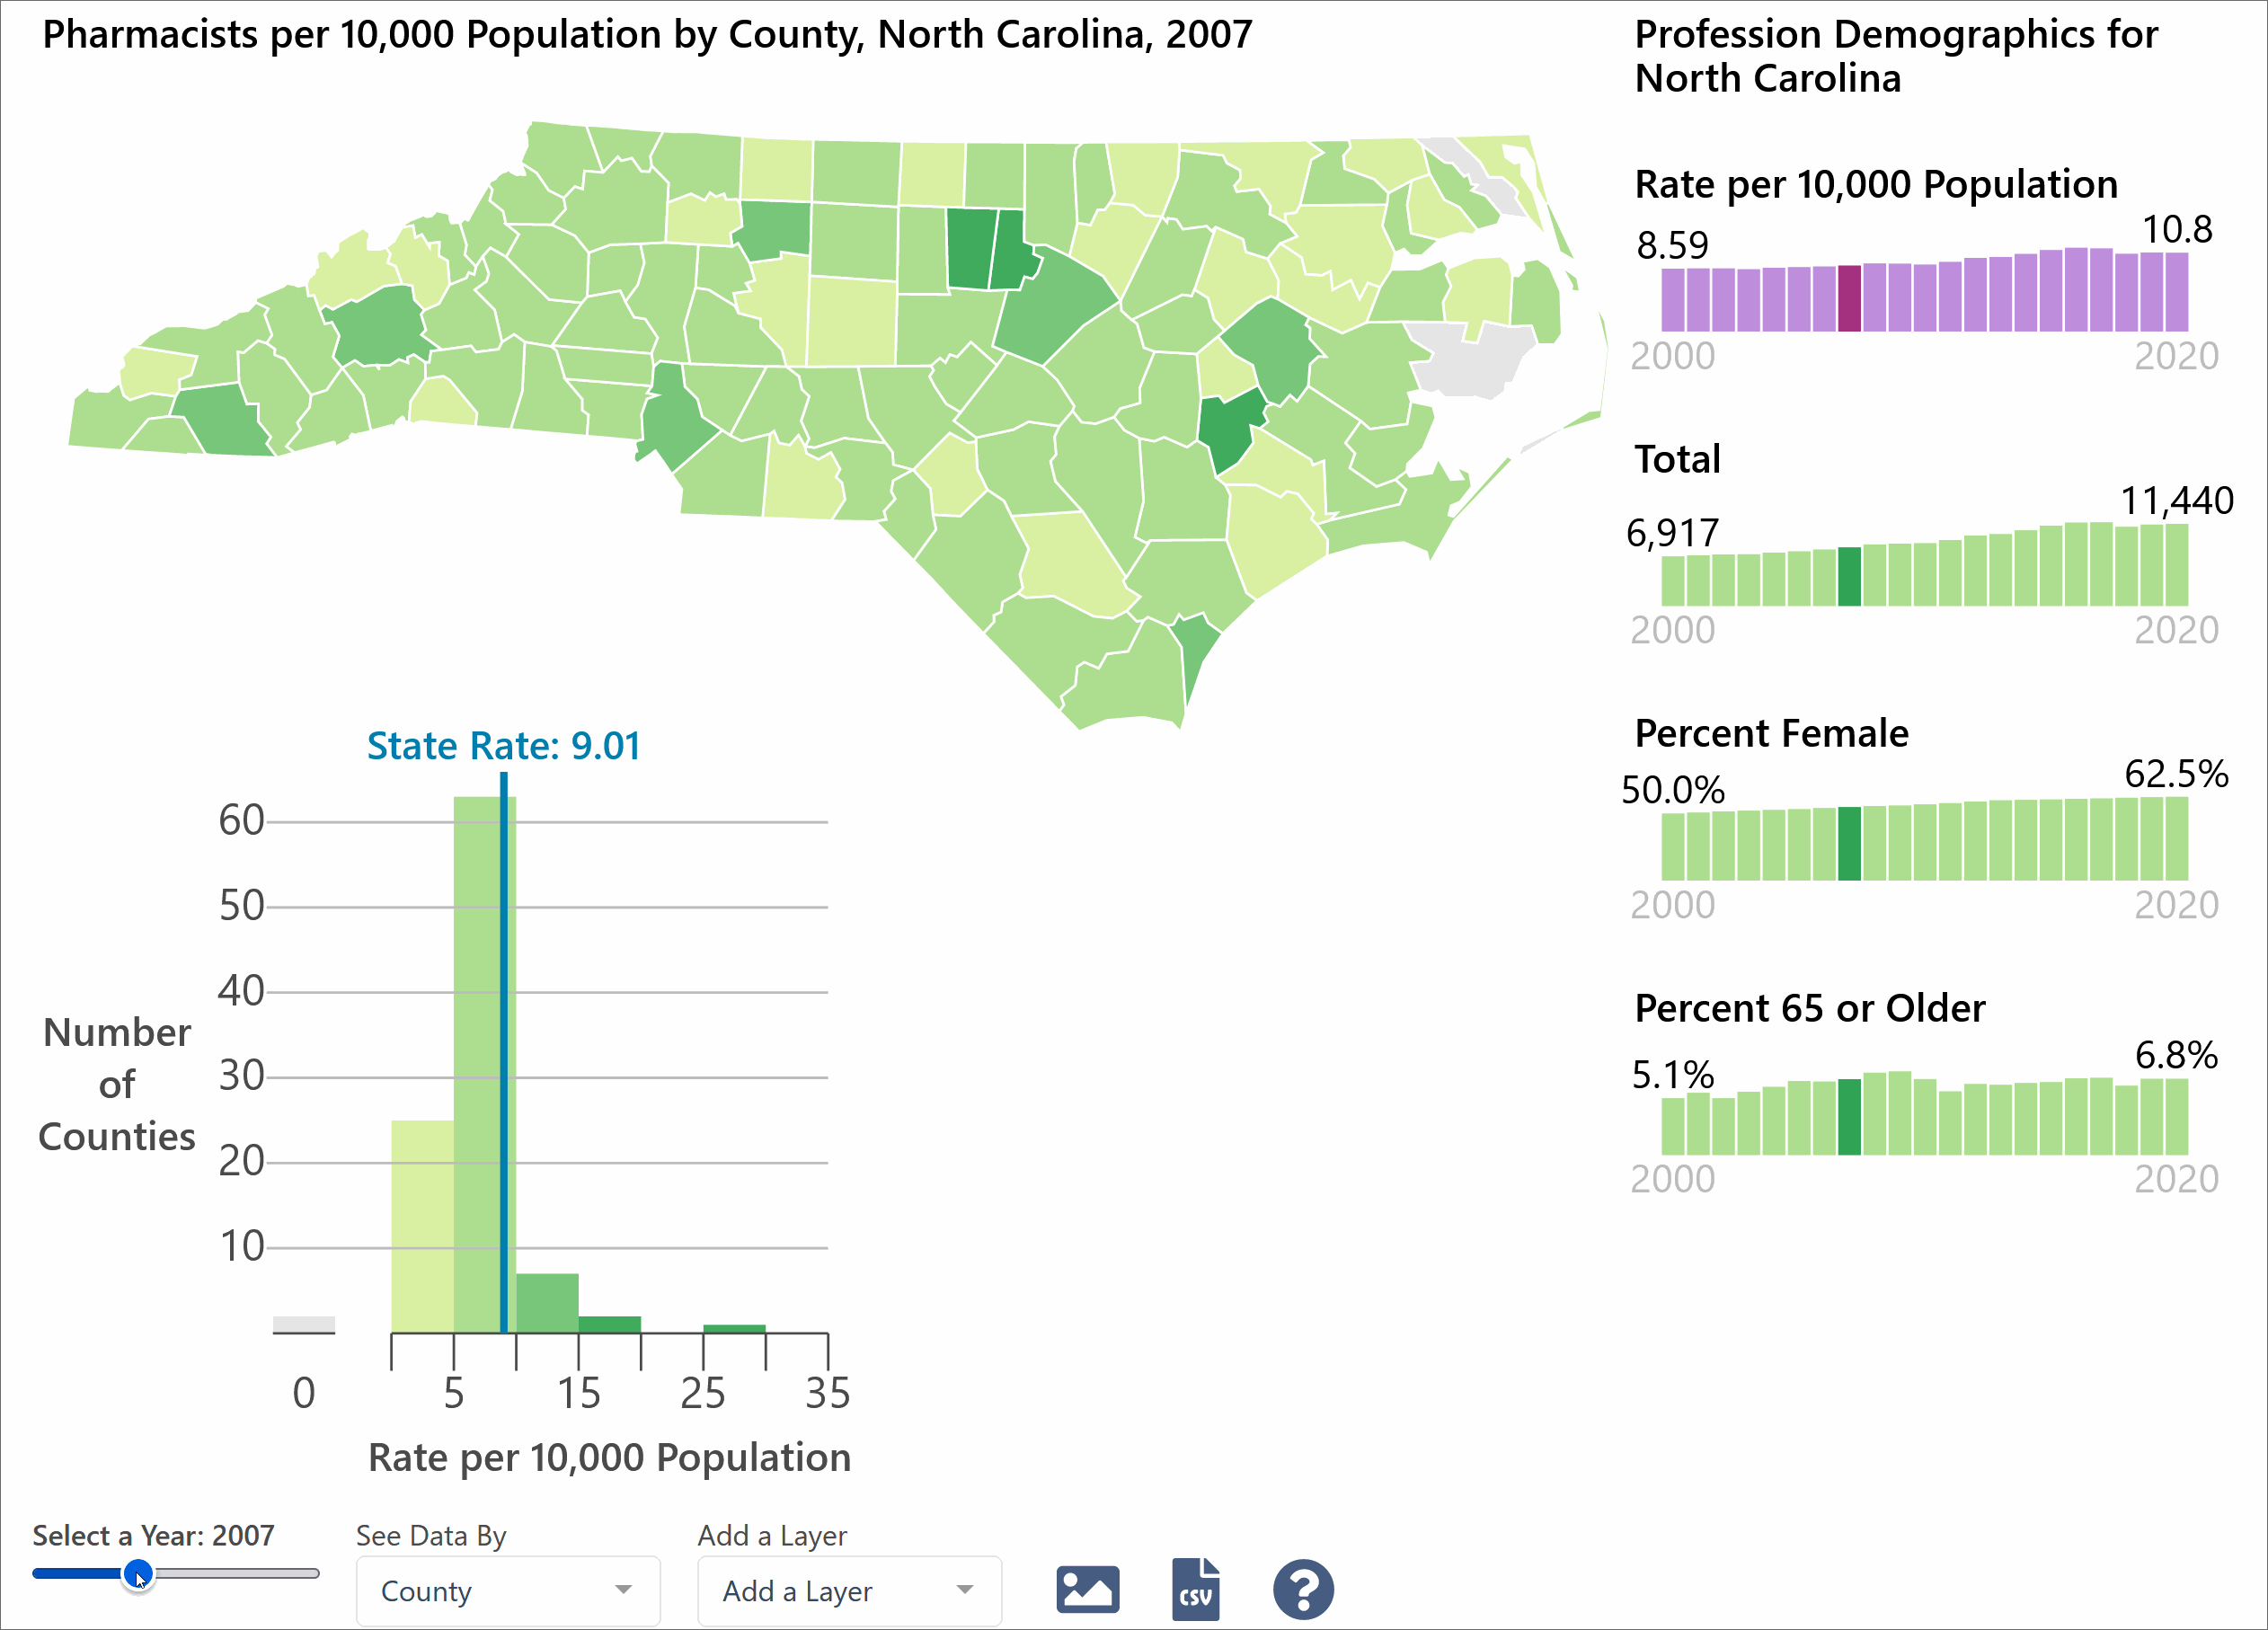 An animated screenshot of the health professions data system showing a data visualization of NC pharmacist demographics and distribution over time.